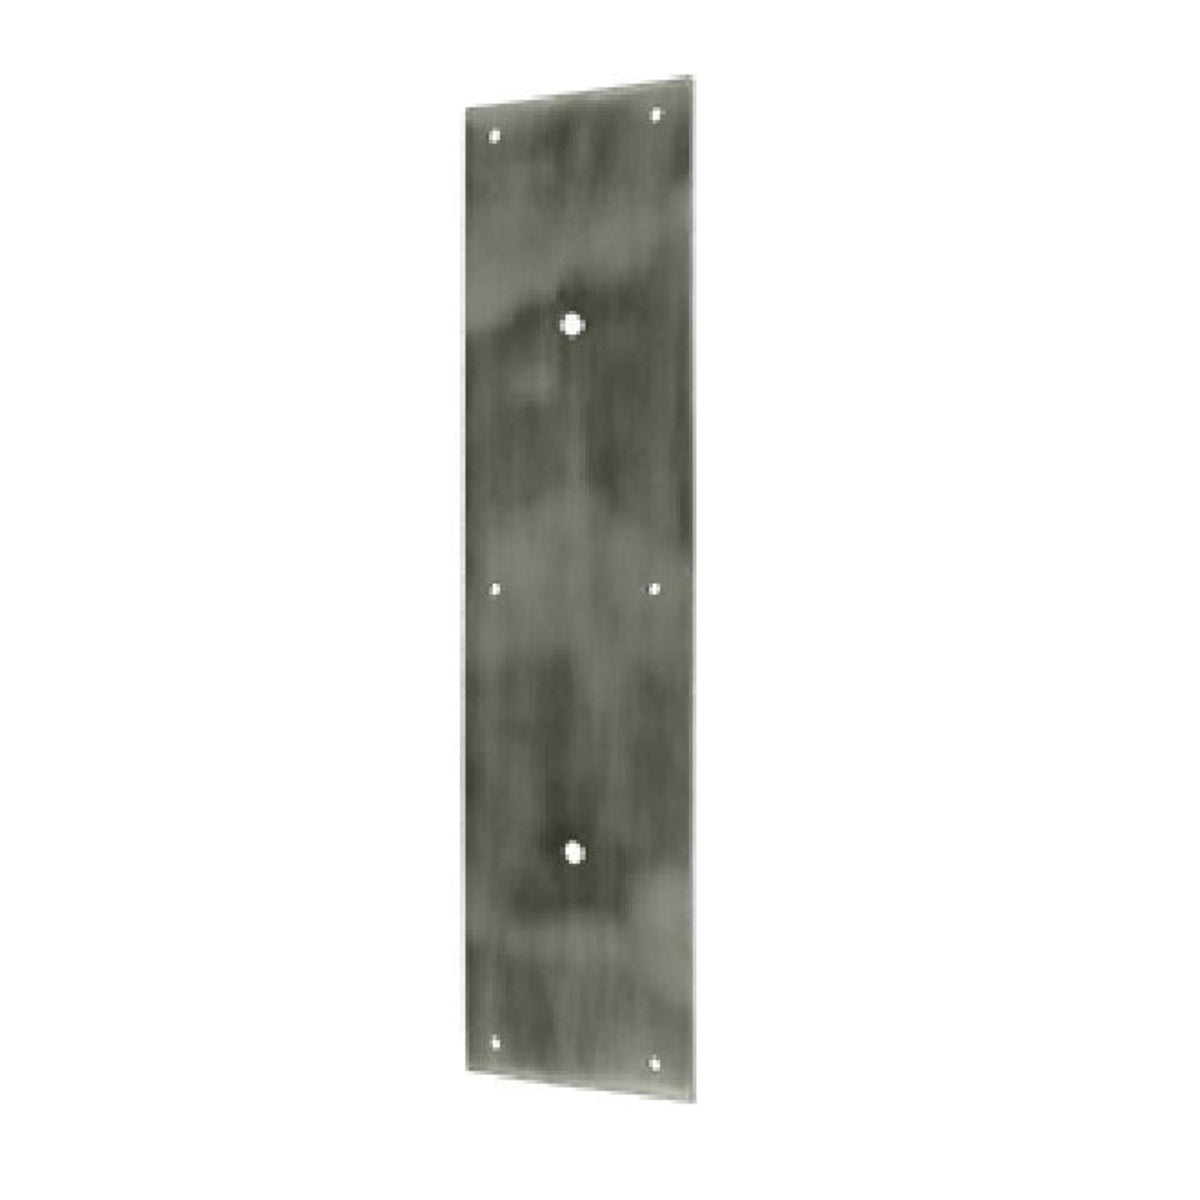 Deltana PPH3515U15A Push Plate For Door Pull, Antique Nickel, 15"